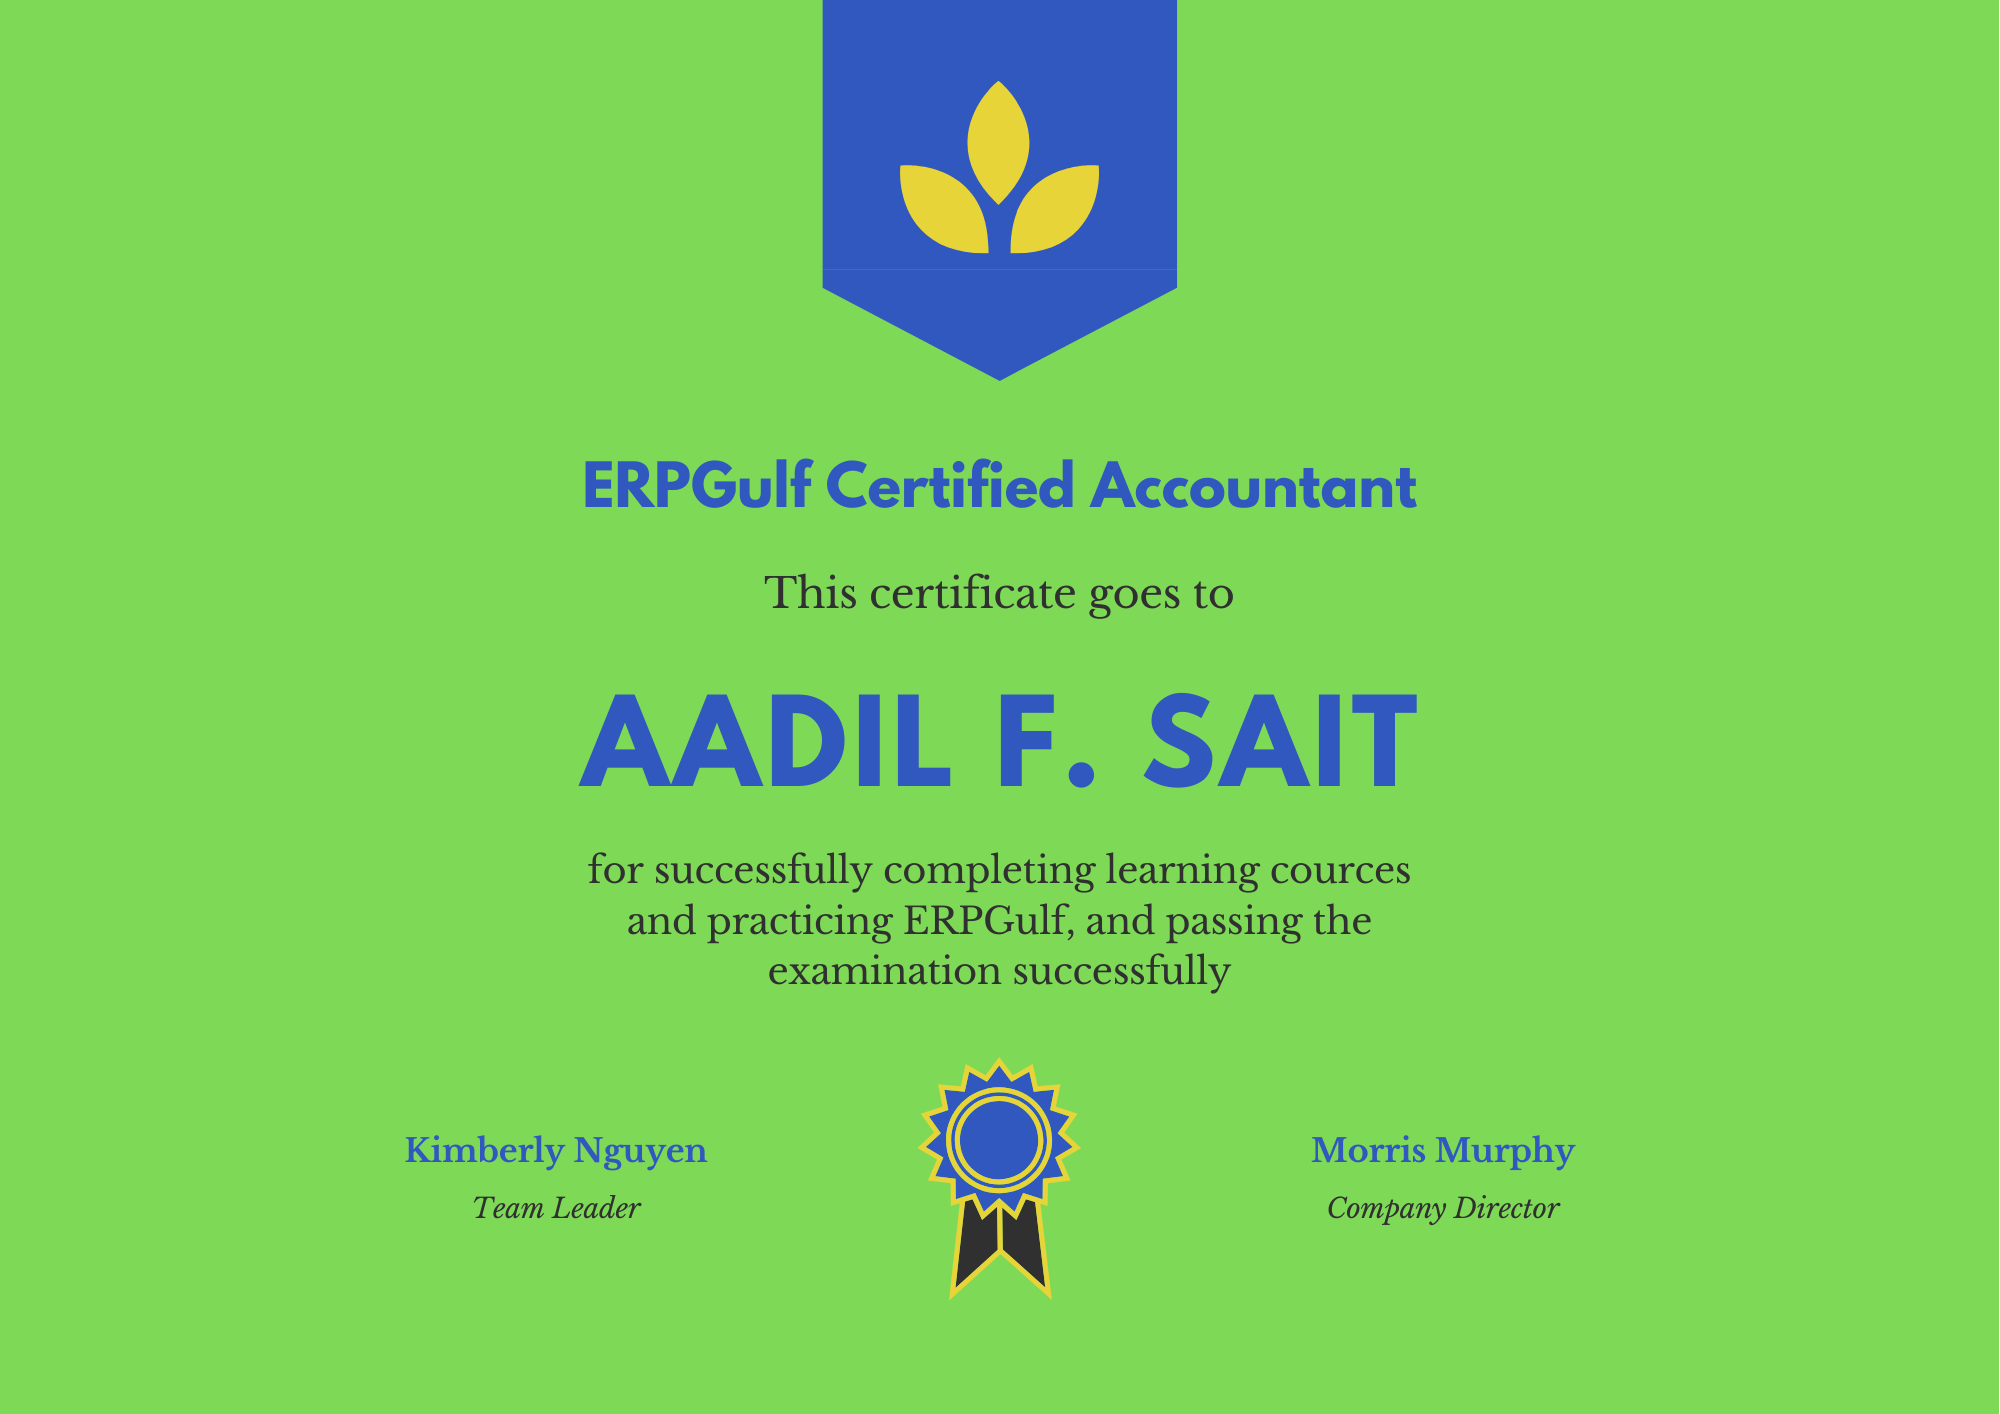 Get certified on ERPGulf - Cover Image